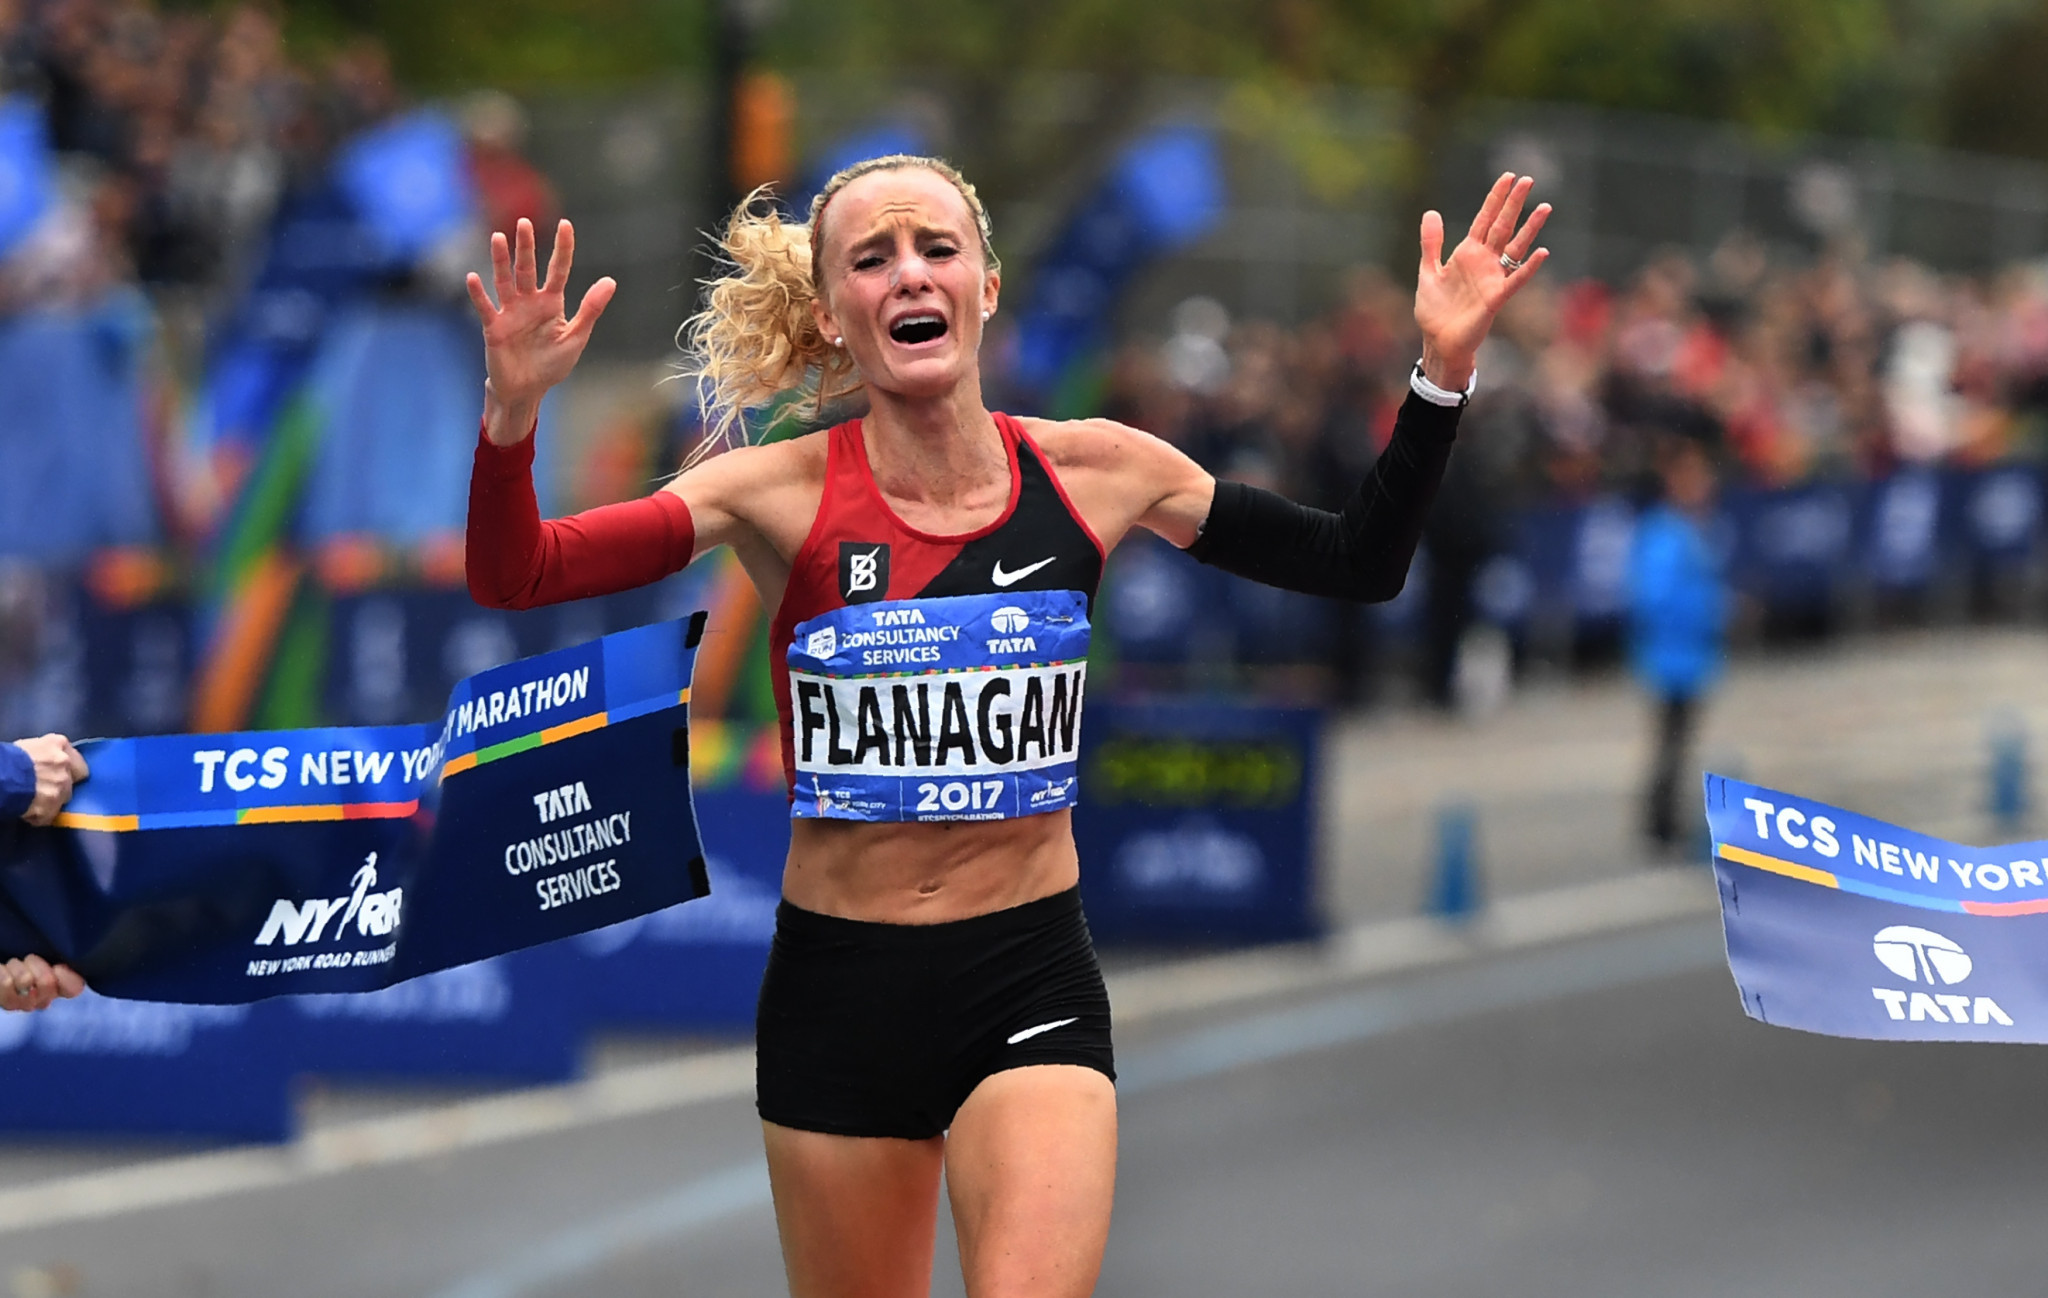  Home hopes high for historic US victory in Boston Marathon 